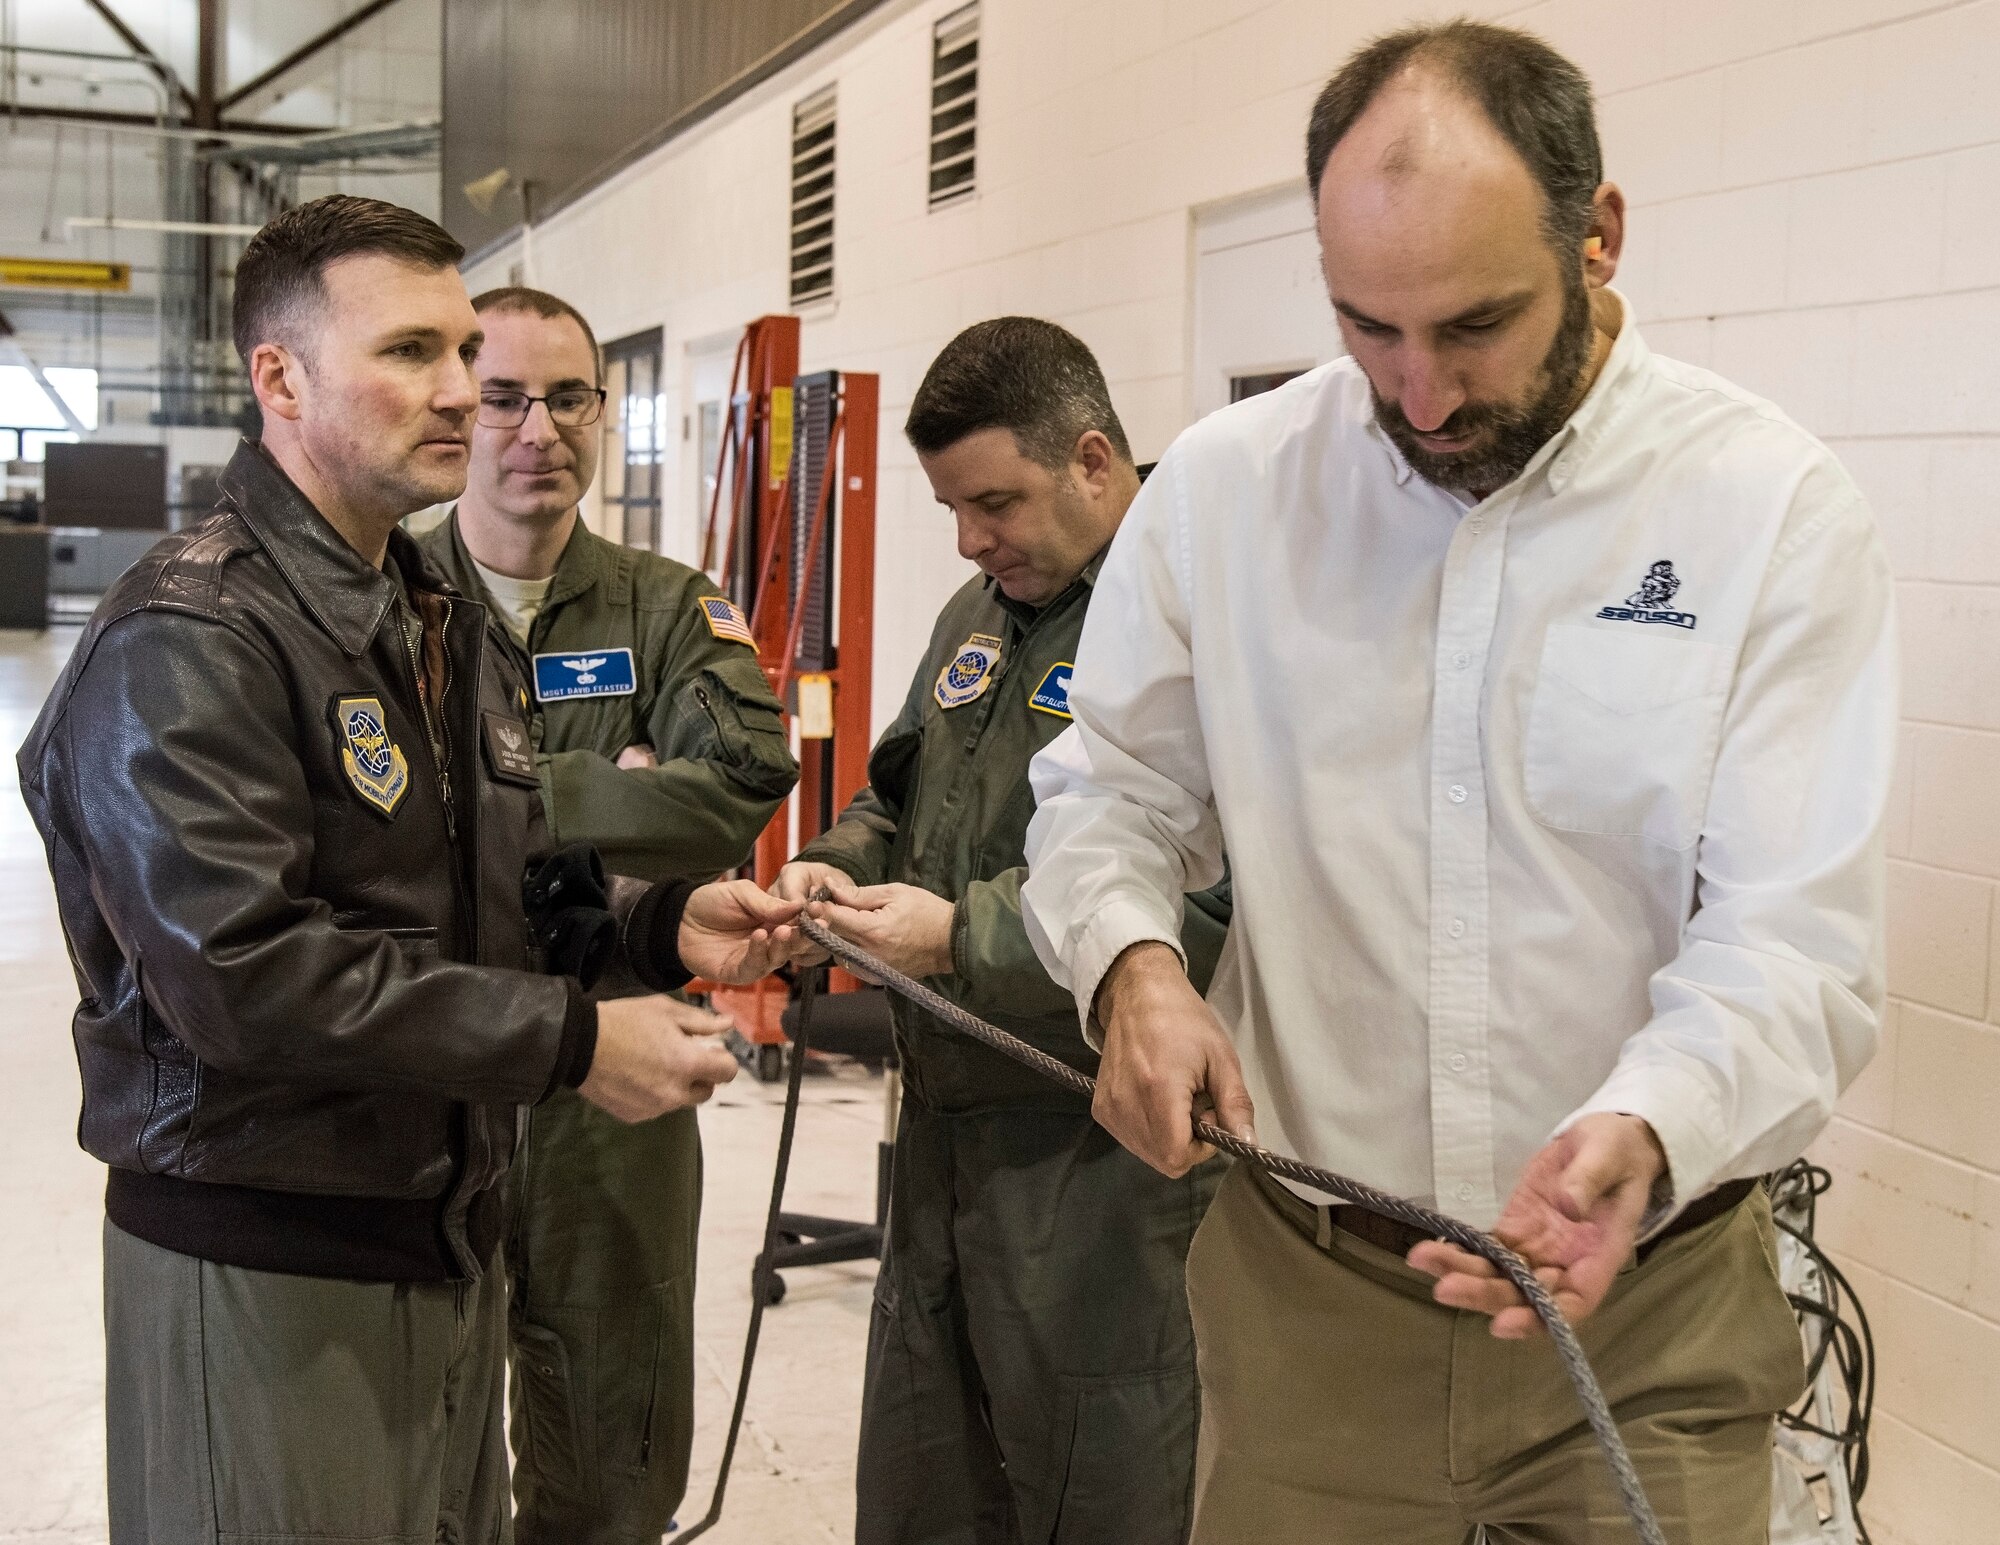 Personnel from the Air Force Research Lab, Wright-Patterson Air Force Base, Ohio and Samson Rope, Ferndale, Wash., demonstrate proposed items for the C-17 Globemaster III fleet Jan. 30, 2018, on Dover Air Force Base, Del. Maintenance personnel from the 736th Aircraft Maintenance Squadron set up an aircraft and back-shop facilities to gather additional data for synthetic rope chains and winch cable usage. (U.S. Air Force photo/Roland Balik)